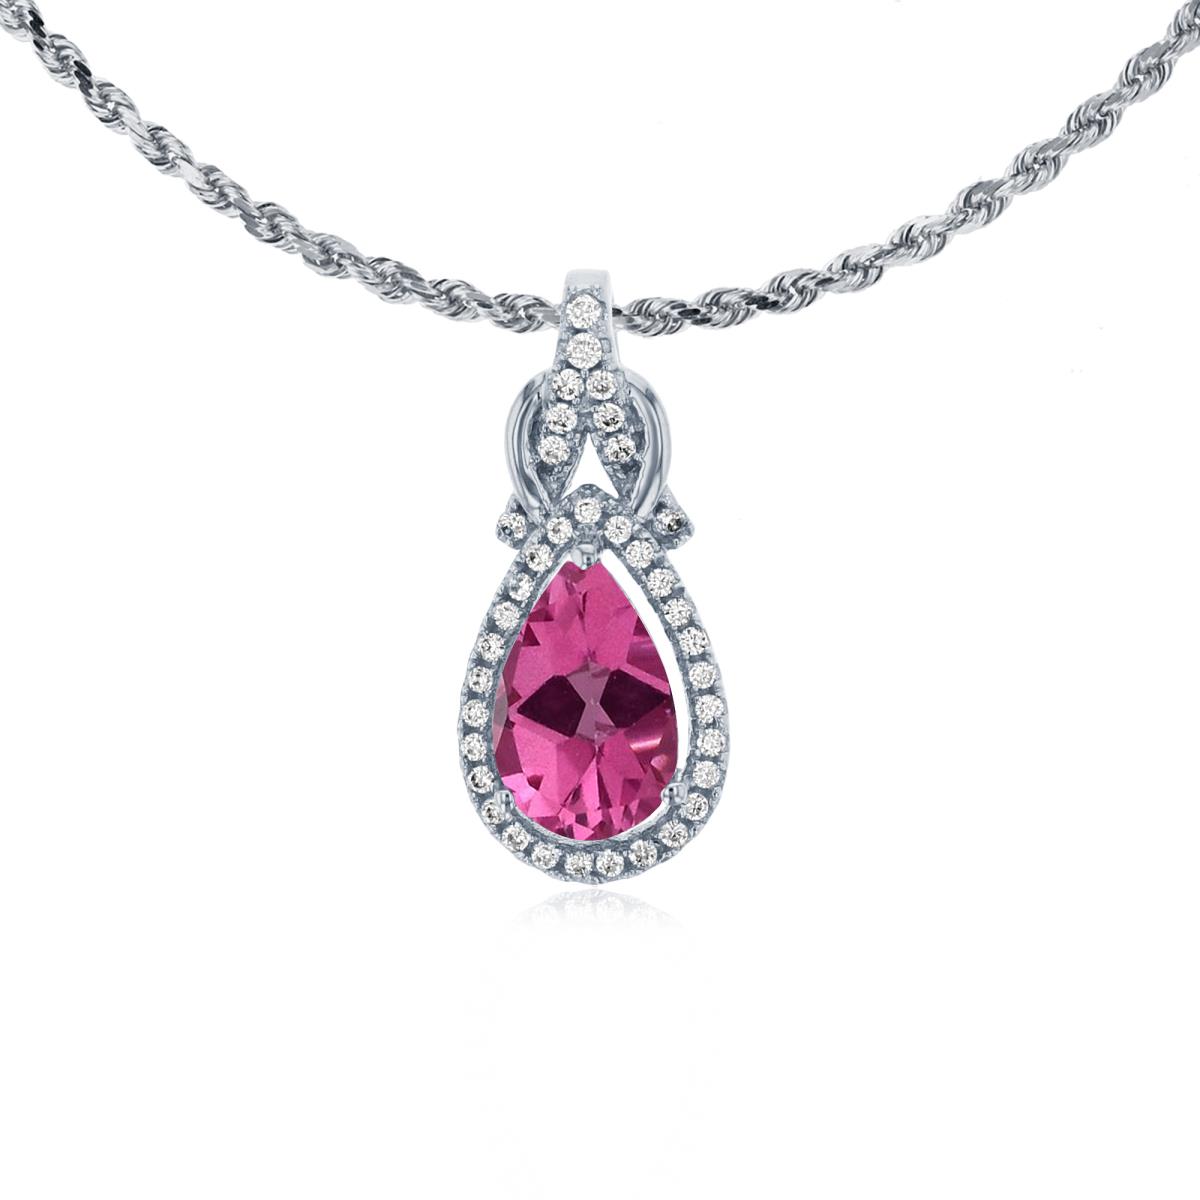 10K White Gold 8x5mm Pear Cut Pure Pink & 0.11 CTTW Rnd Diamond Knot 18" Rope Chain Necklace